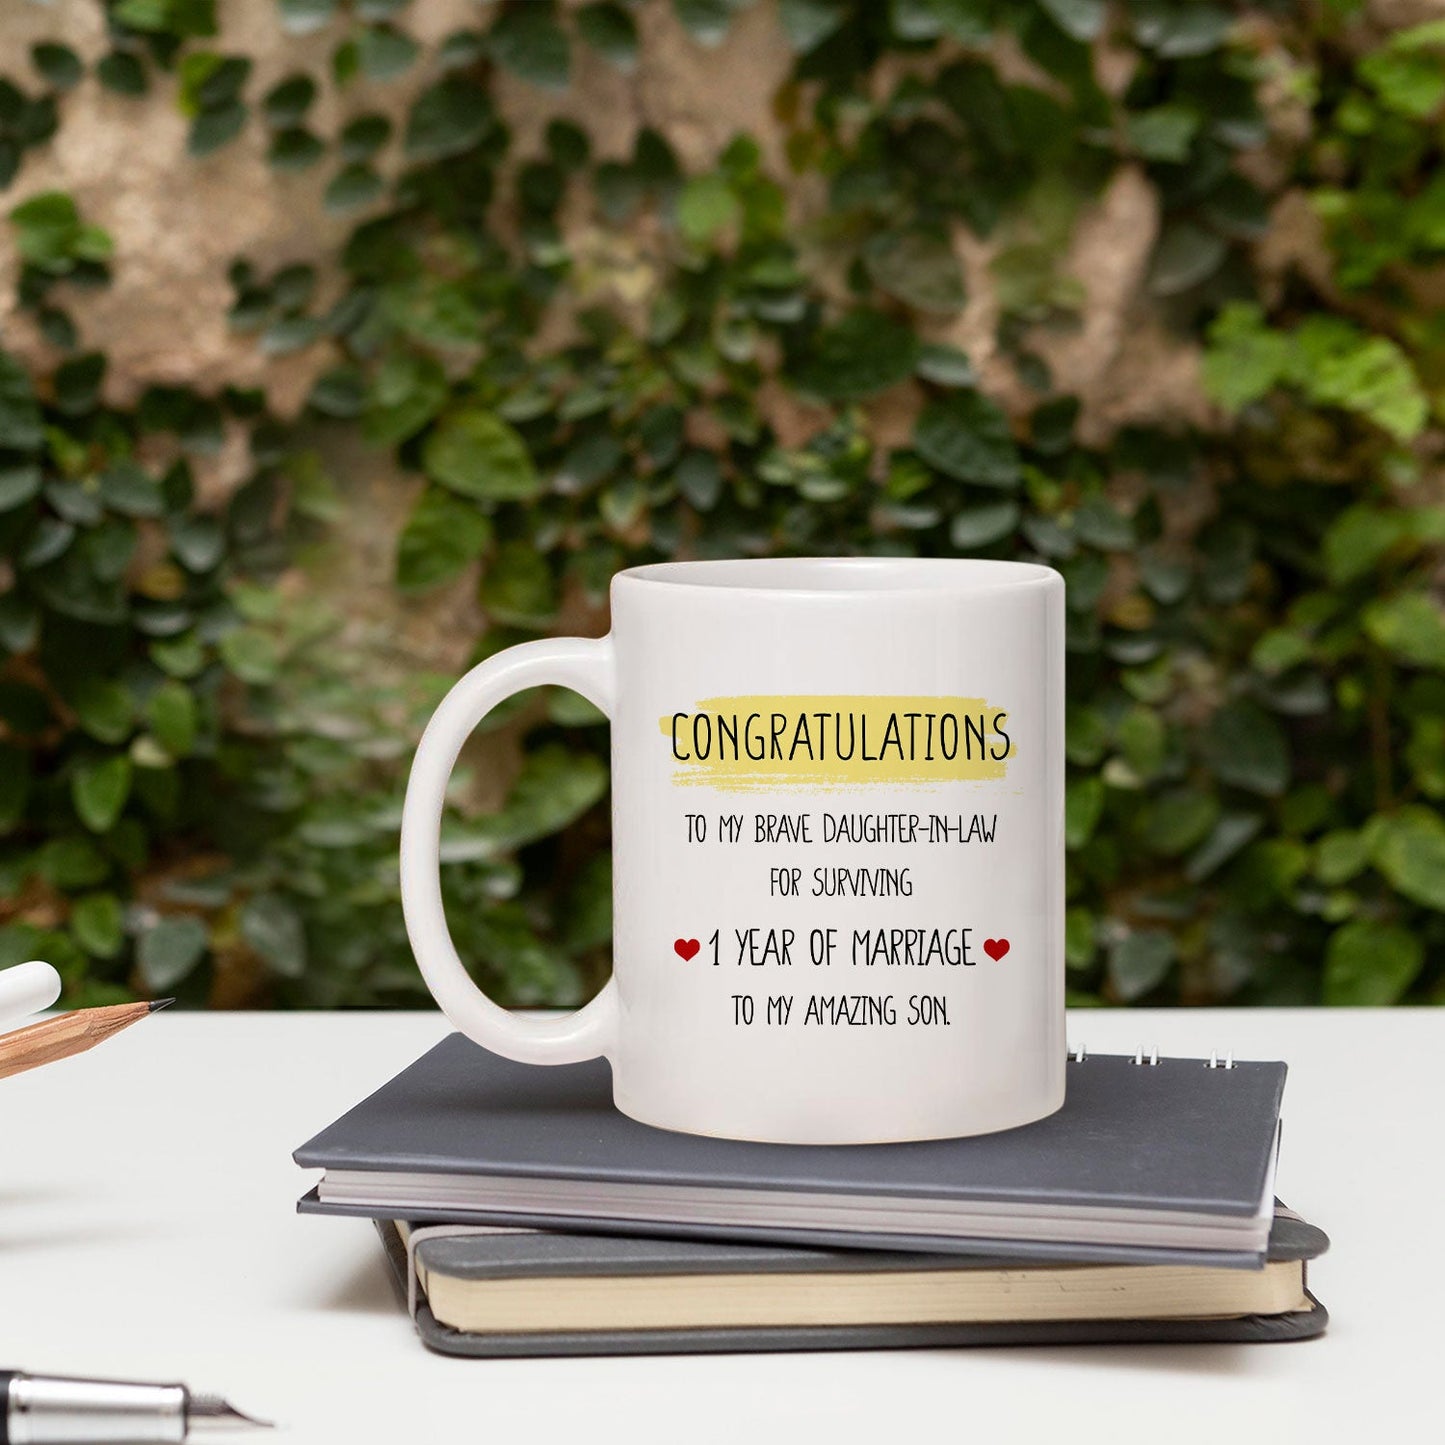 1 Year Of Marriage - Personalized 1 Year Anniversary gift For Son & Daughter In Law - Custom Mug - MyMindfulGifts